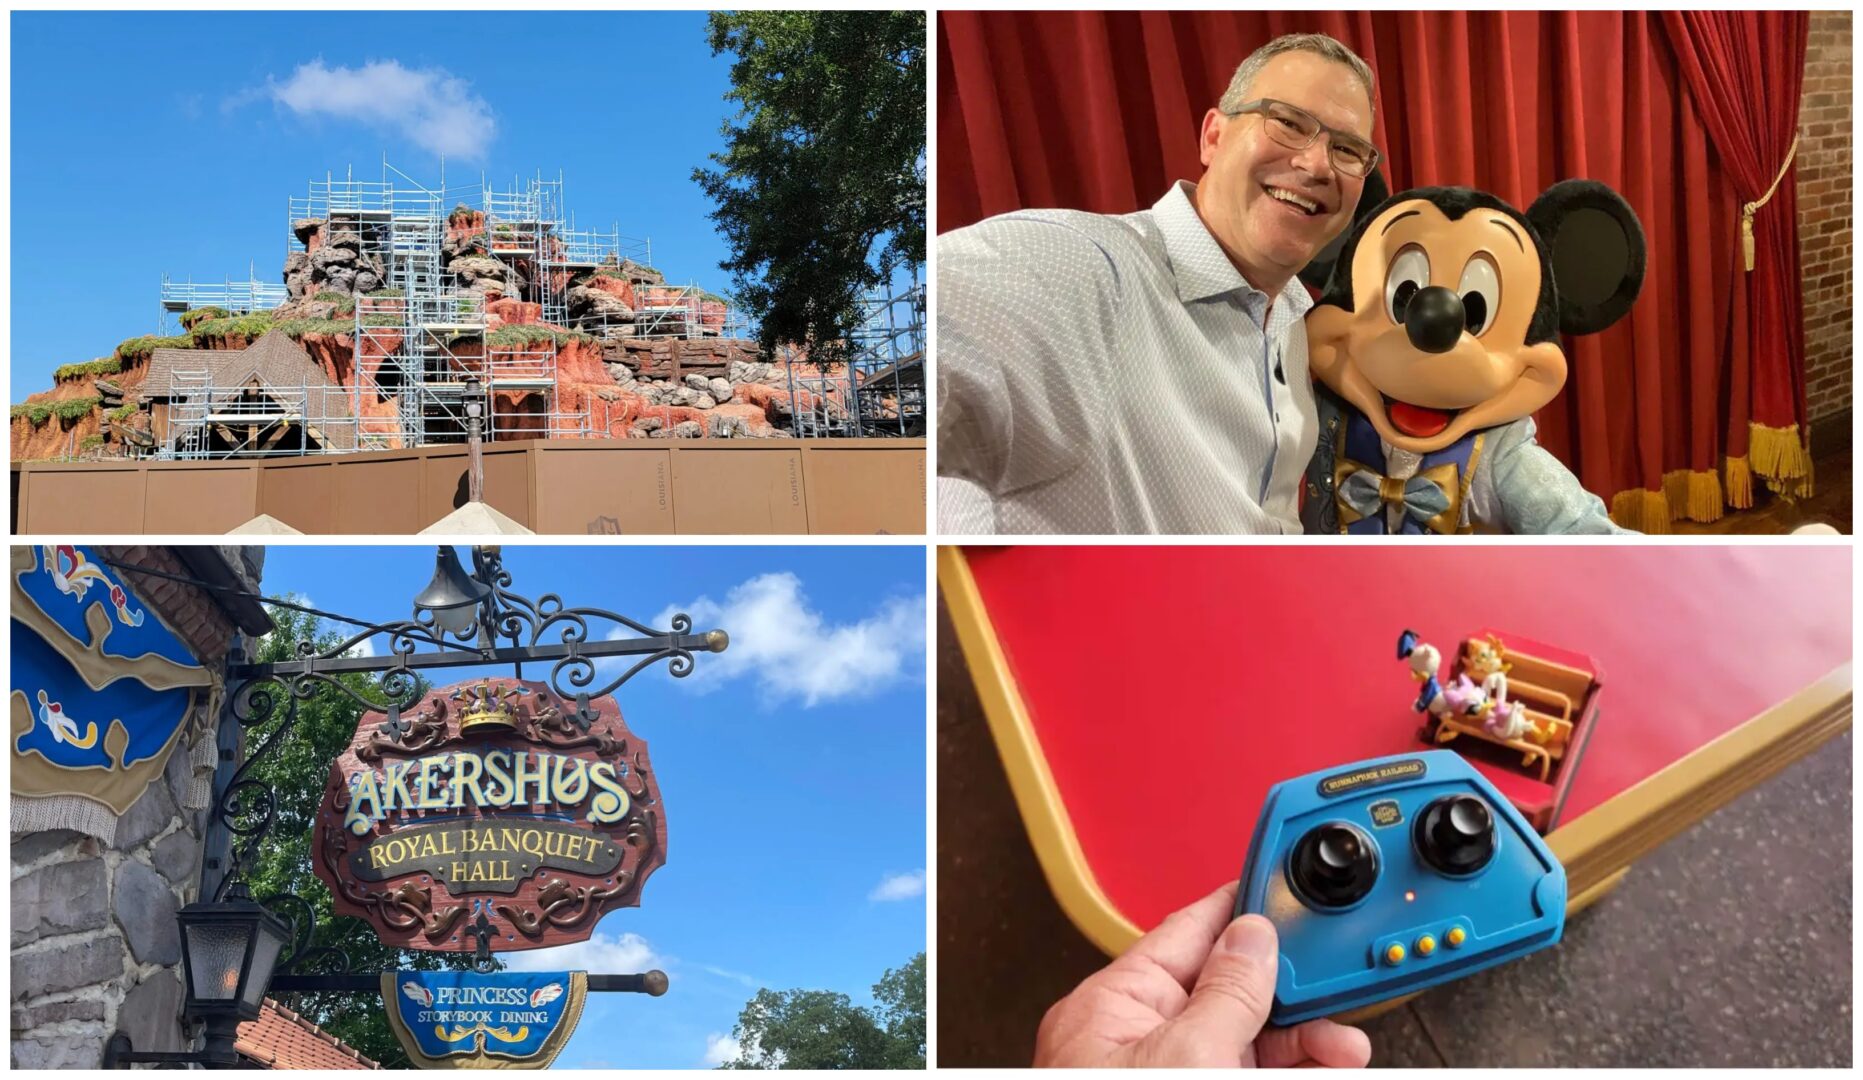 Disney News Highlights: New Ariel Meet and Greet Starts May 26th, Akershus Royal Breakfast Review, World Showcase Lagoon View Restored, Disney World President Issues Statement About Lake Nona